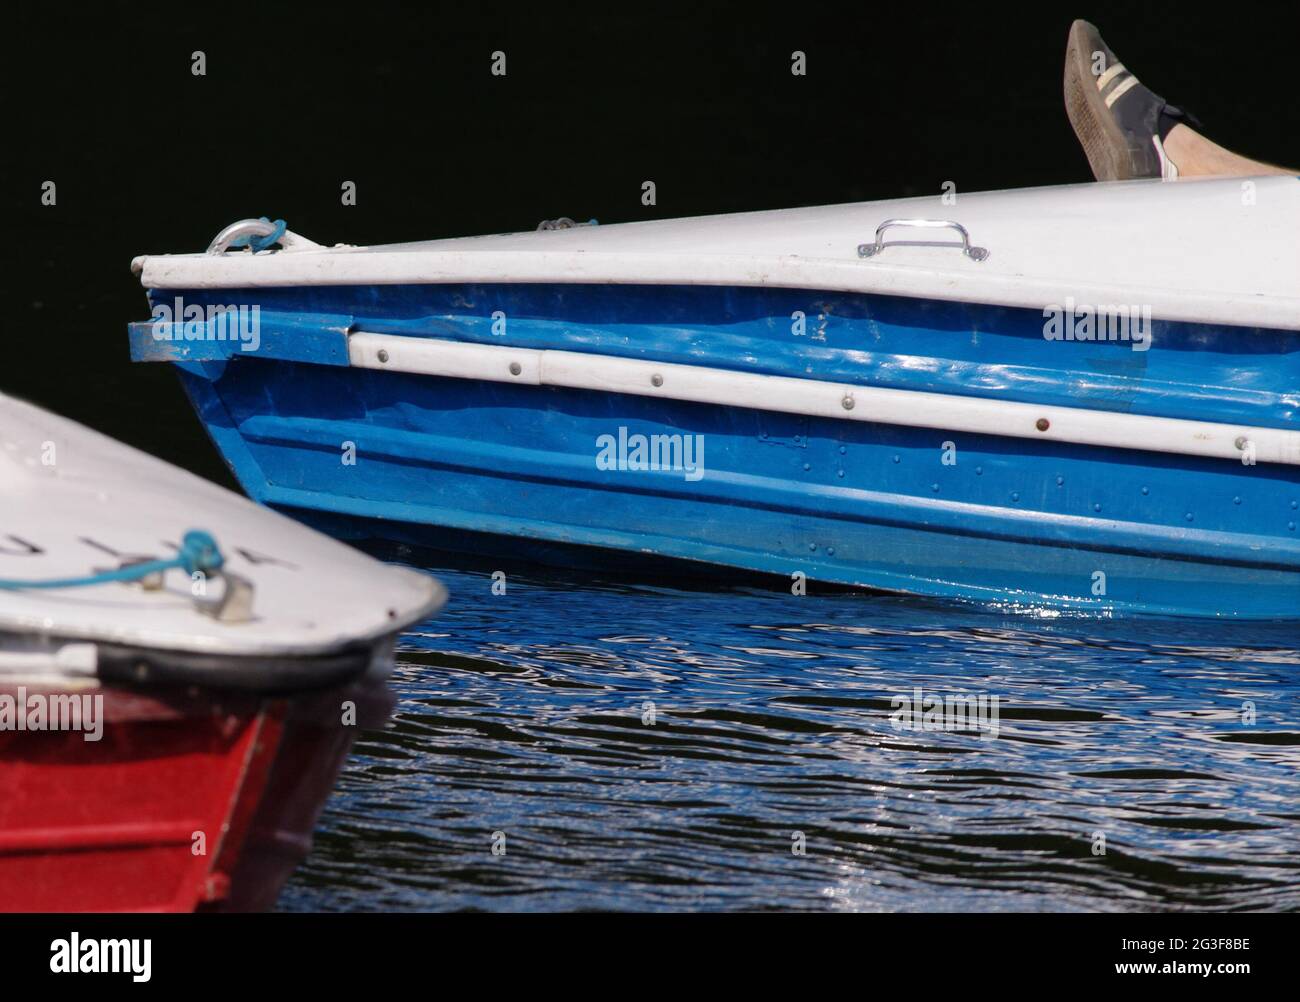 Pedalos on a lake in germny Stock Photo